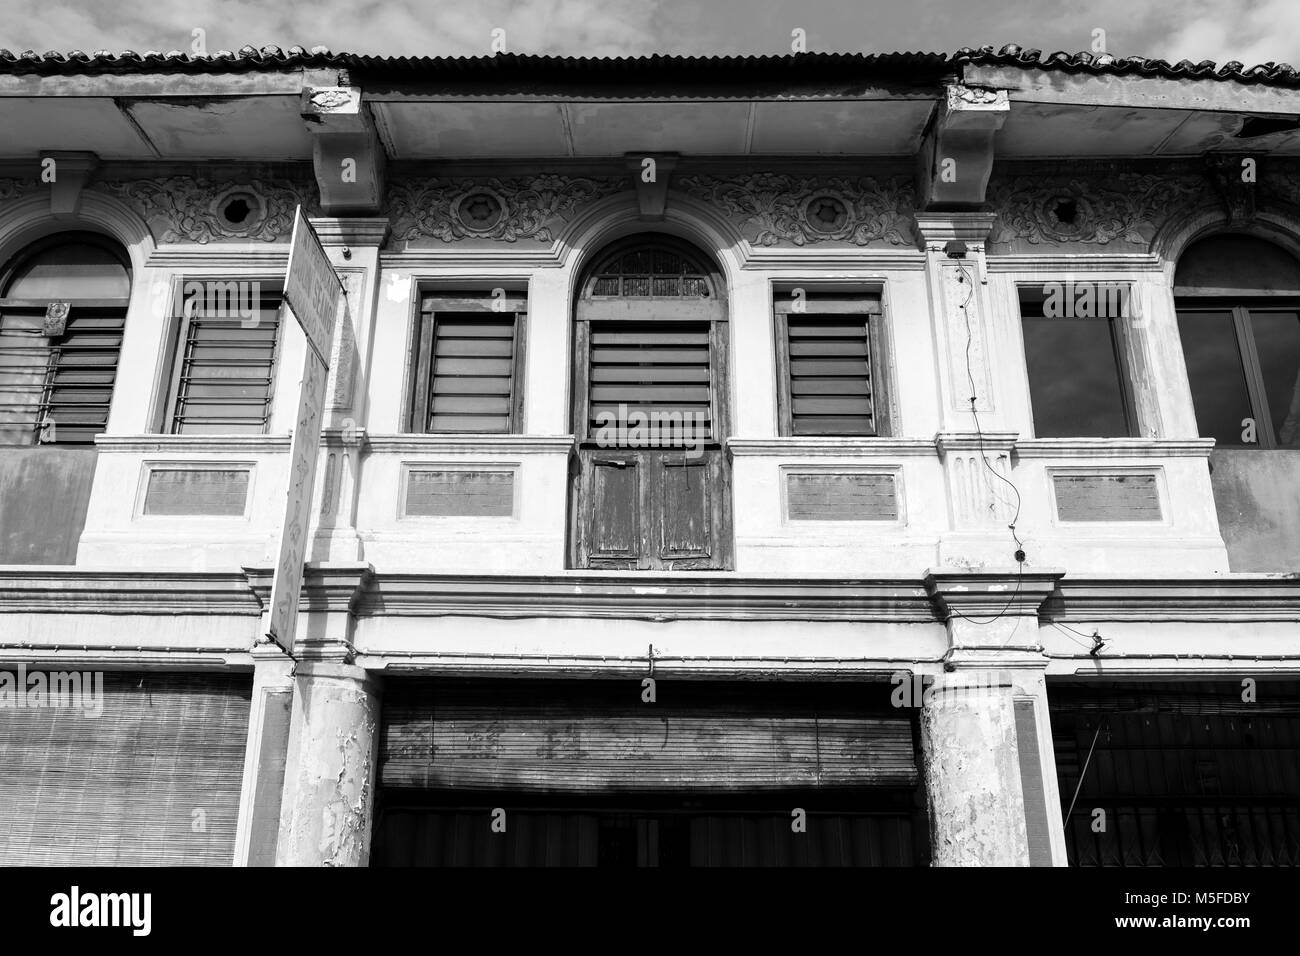 George Town, Malaysia, 19. Dezember 2017: Fassade des alten Gebäudes im UNESCO Welterbe Zone, Penang in Malaysia Stockfoto